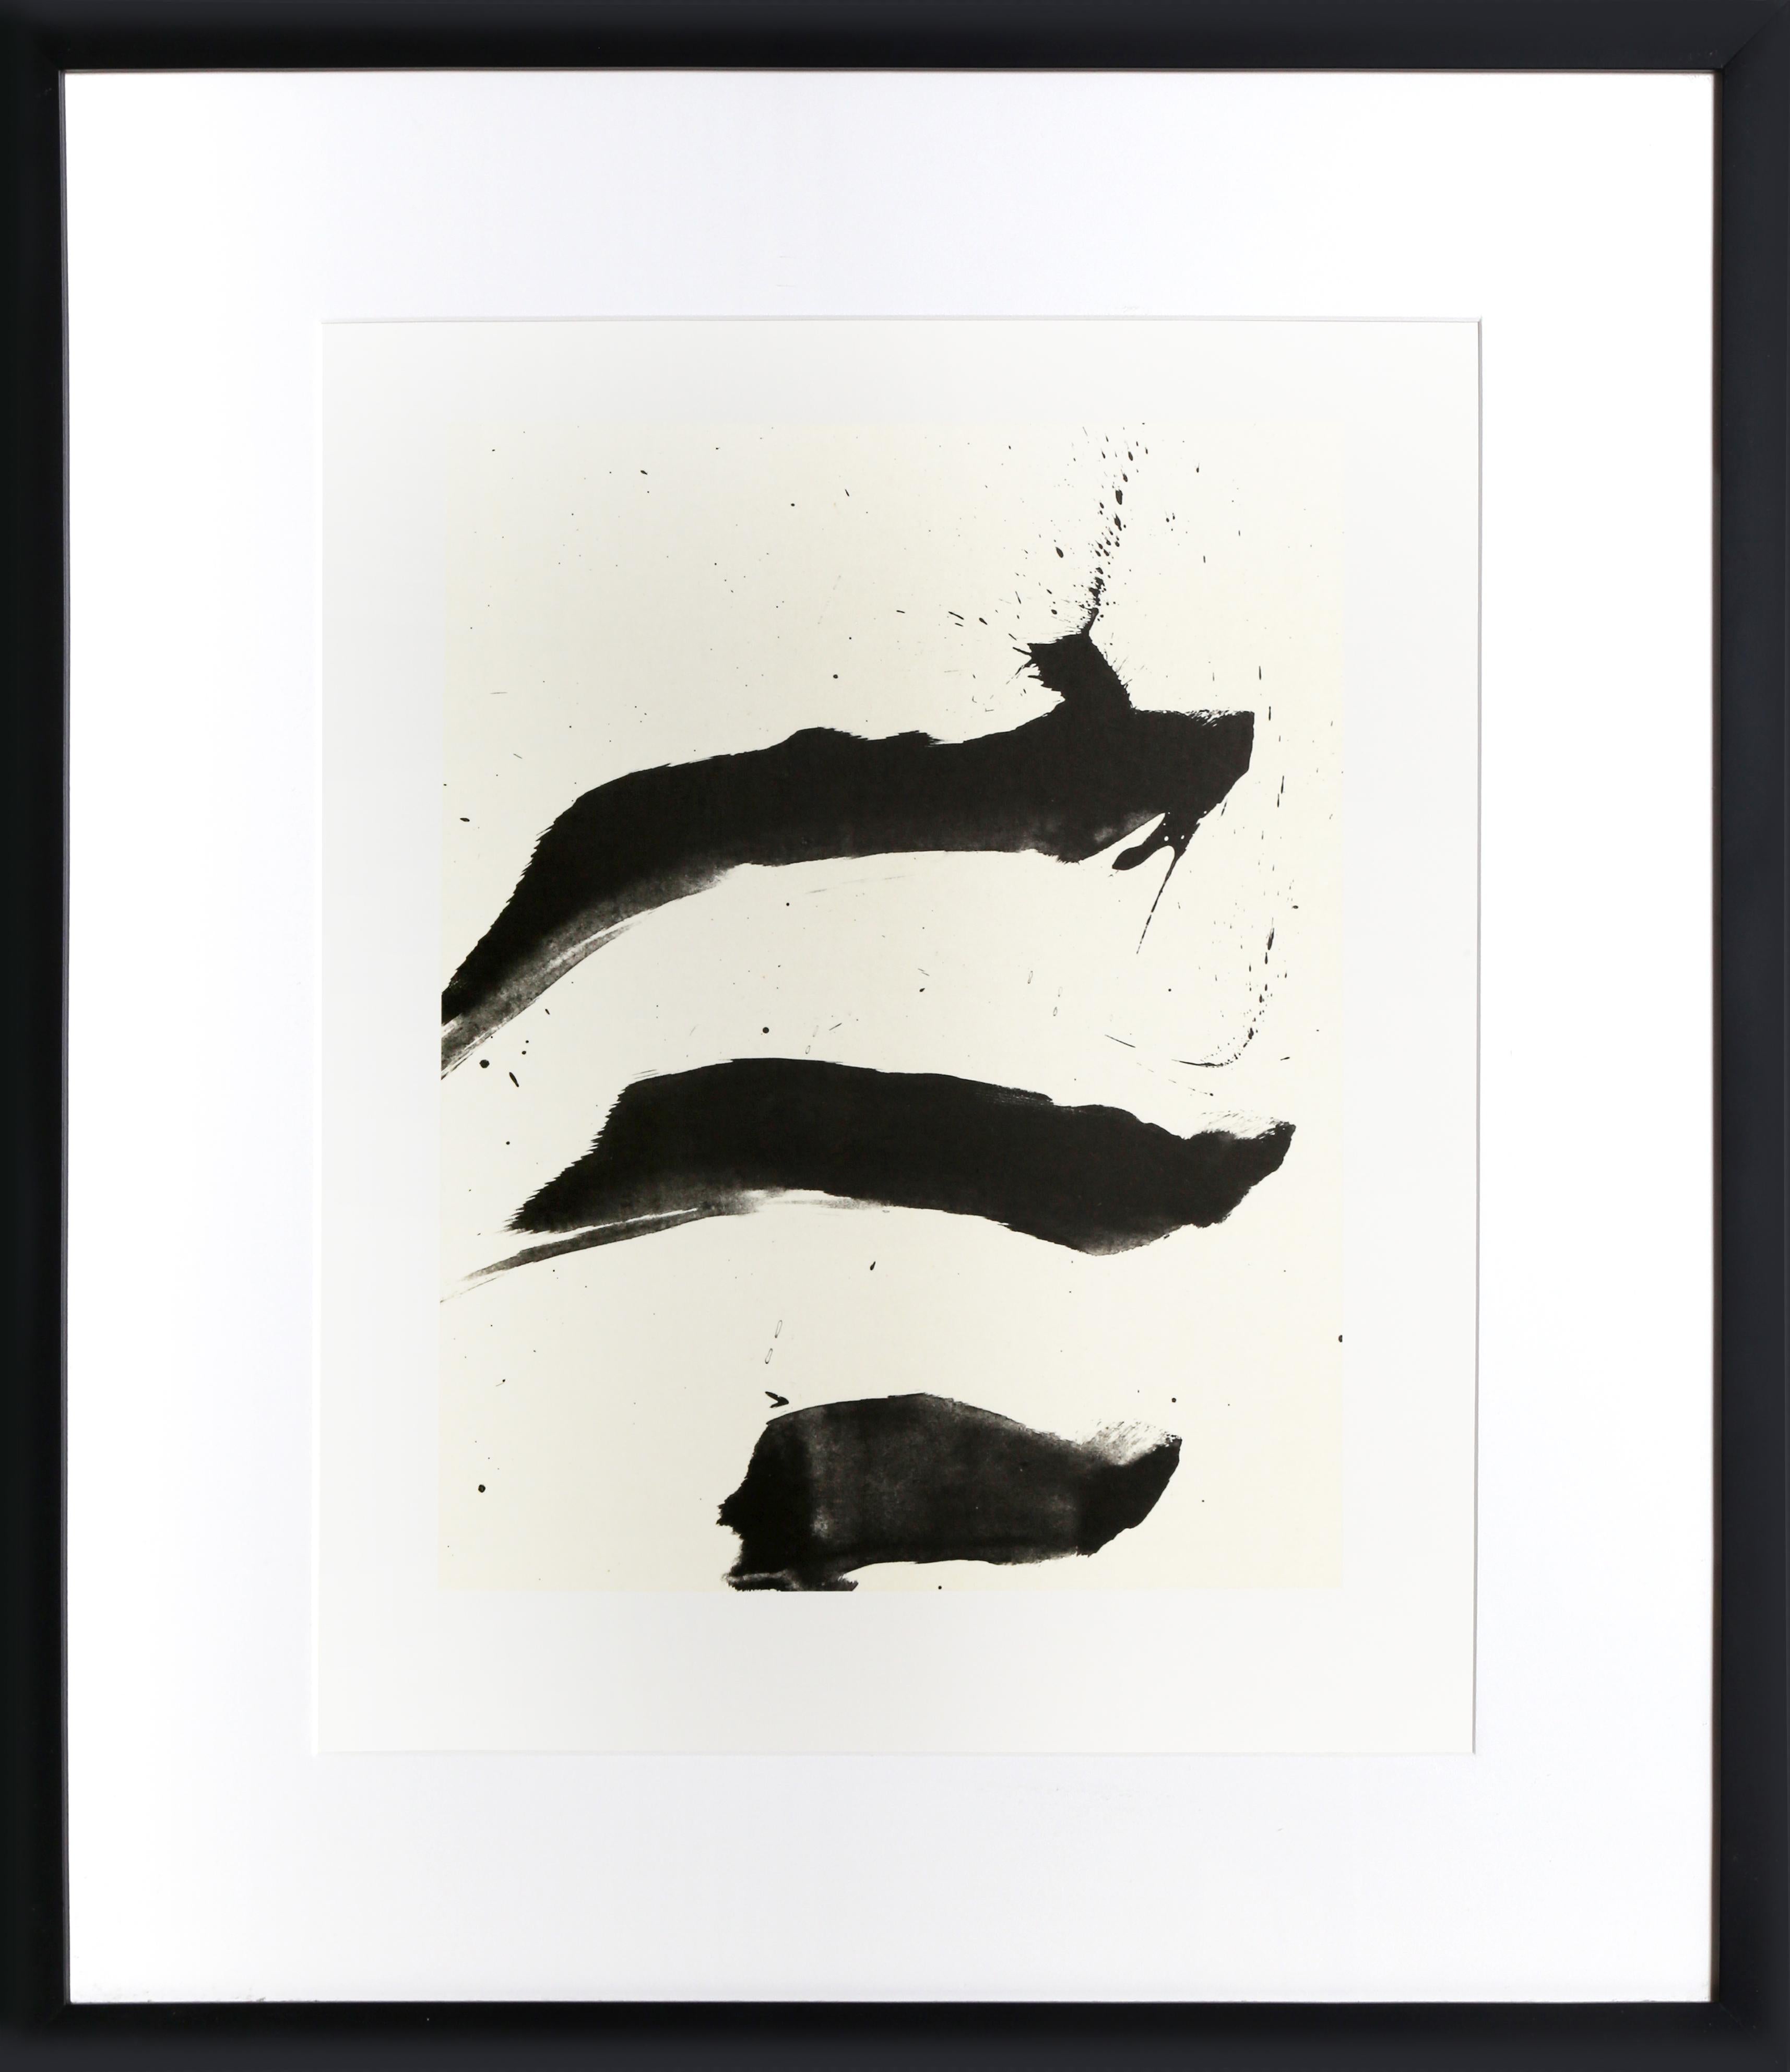 Artist: Robert Motherwell, American (1915 - 1991)
Title: No. 7 from Three Poems, collaboration with Octavio Paz
Year: 1987
Medium:	Lithograph on Japon with Chine Colle
Edition: 750
Image Size: 14 x 10.5 inches
Paper Size: 21 x 16 inches
Frame Size: